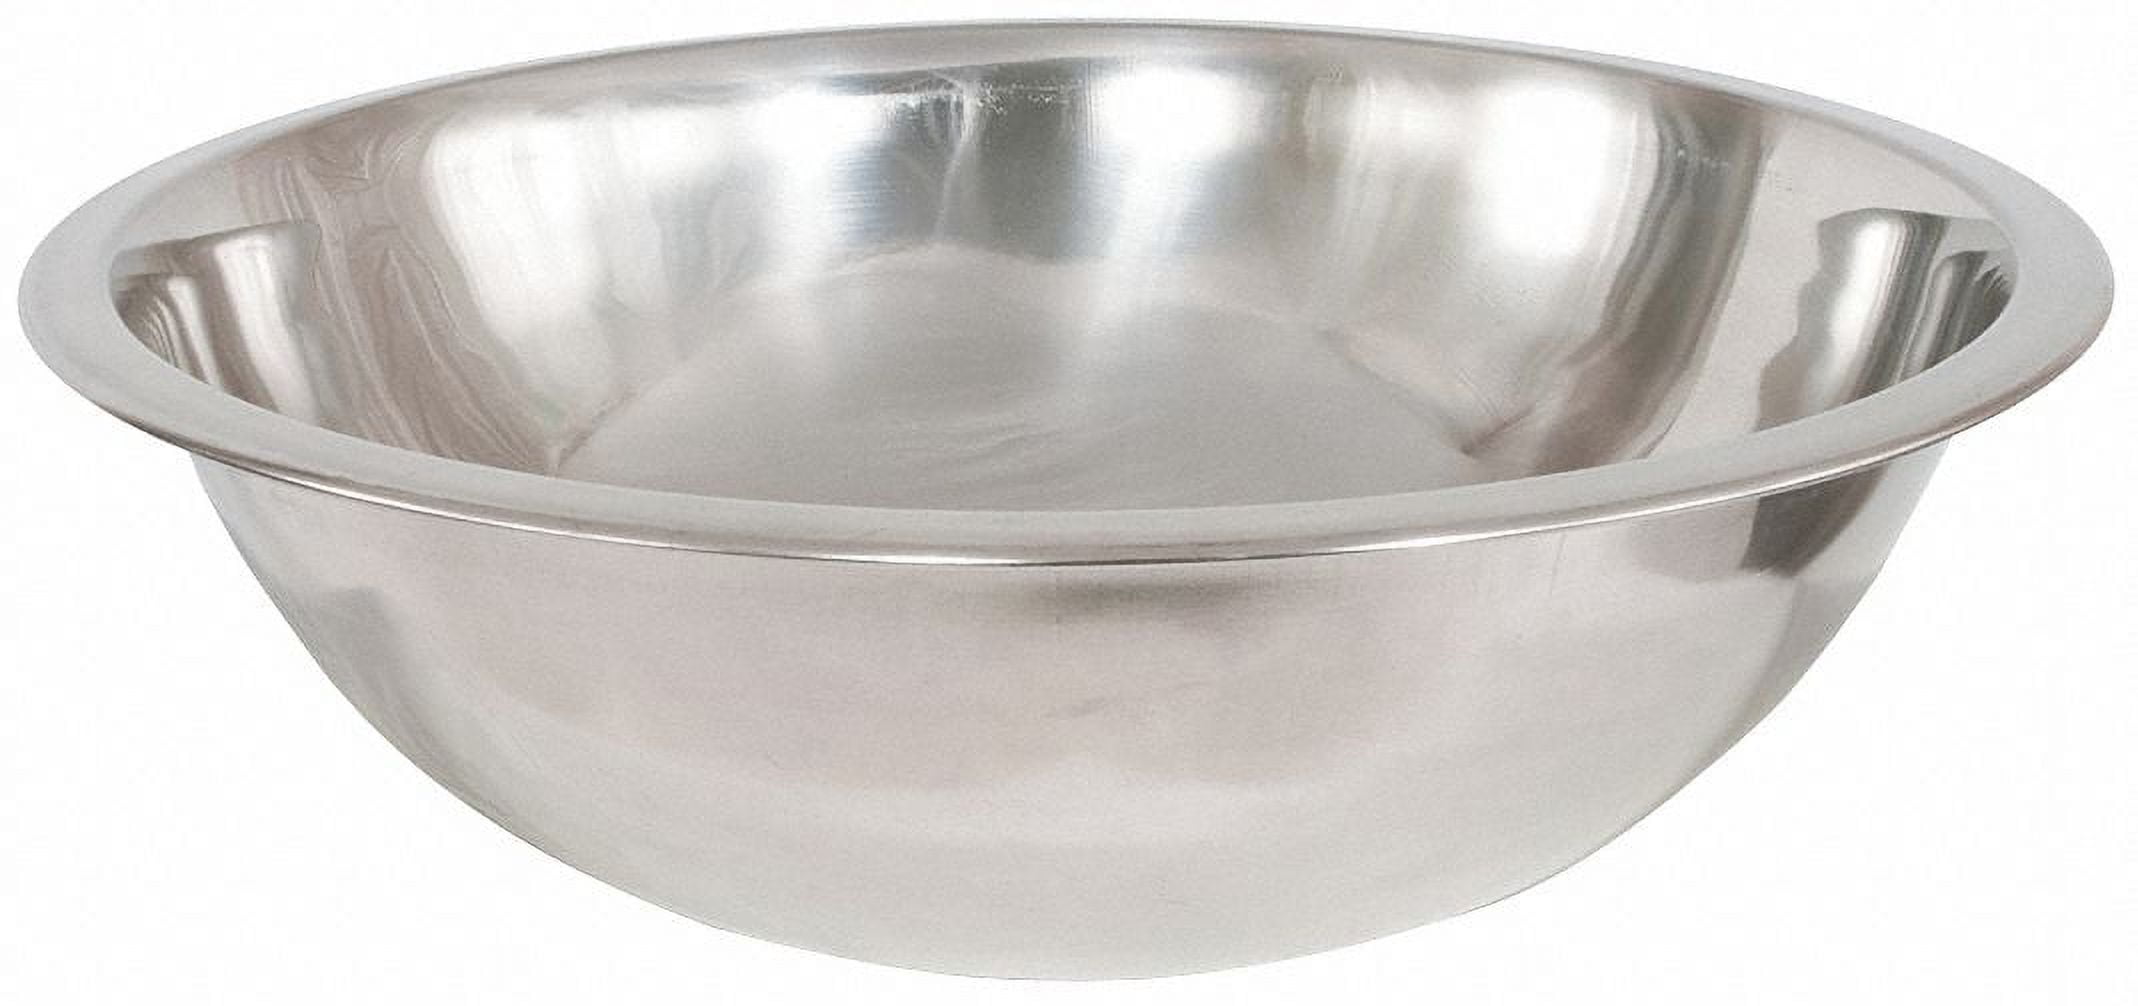 Oggi 8-Quart Two-Tone Stainless Steel Mixing Bowl with Airtight Lid